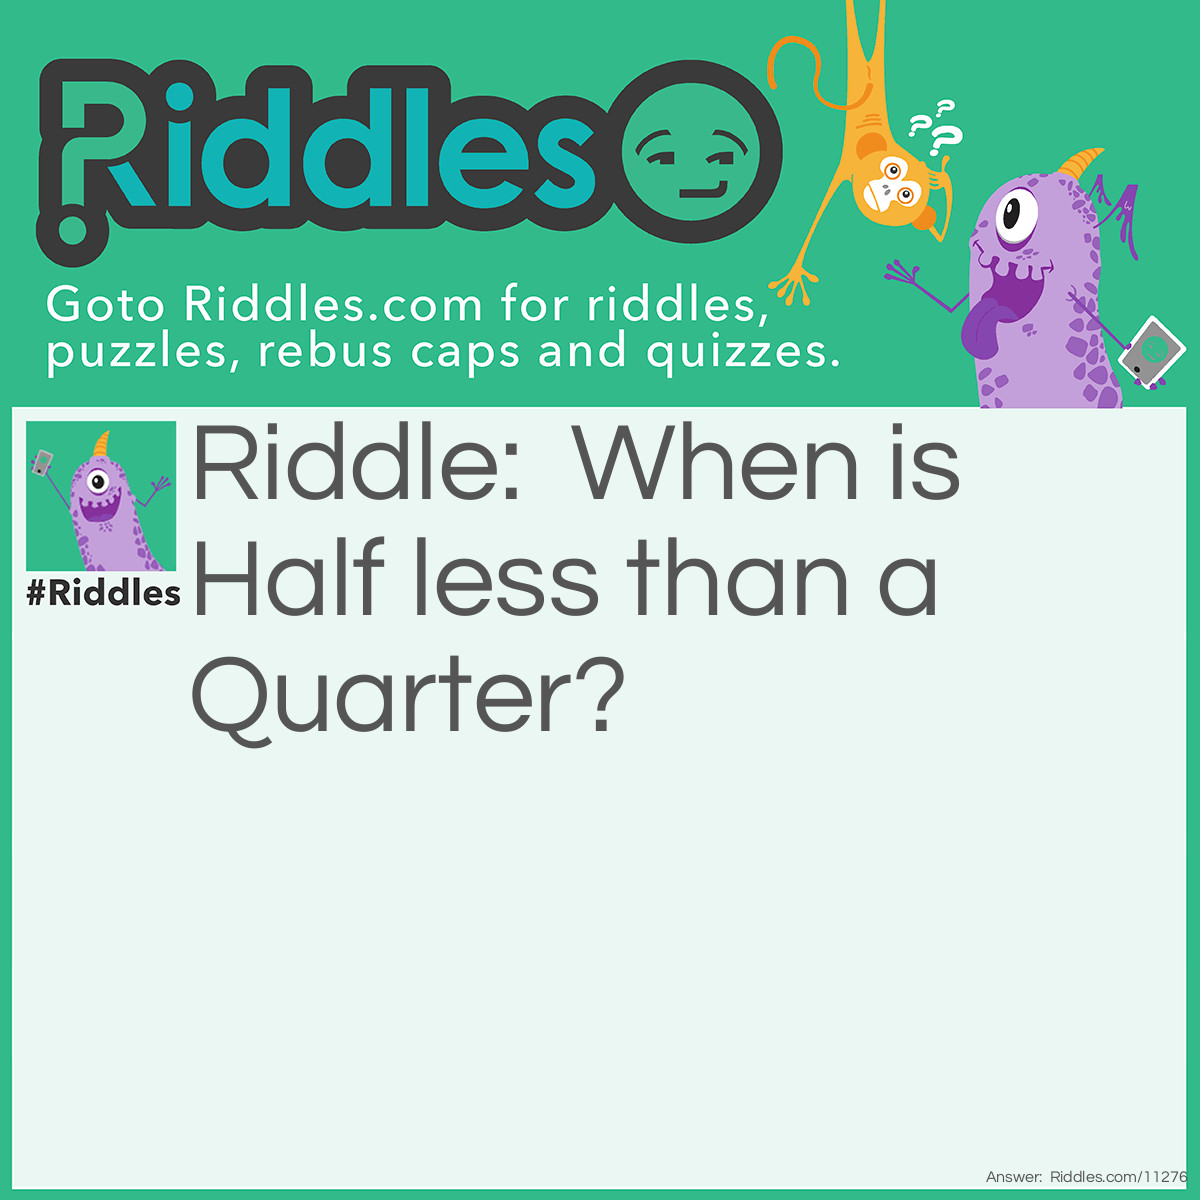 Riddle: When is Half less than a Quarter? Answer: When you count the letters each word is spelled with.